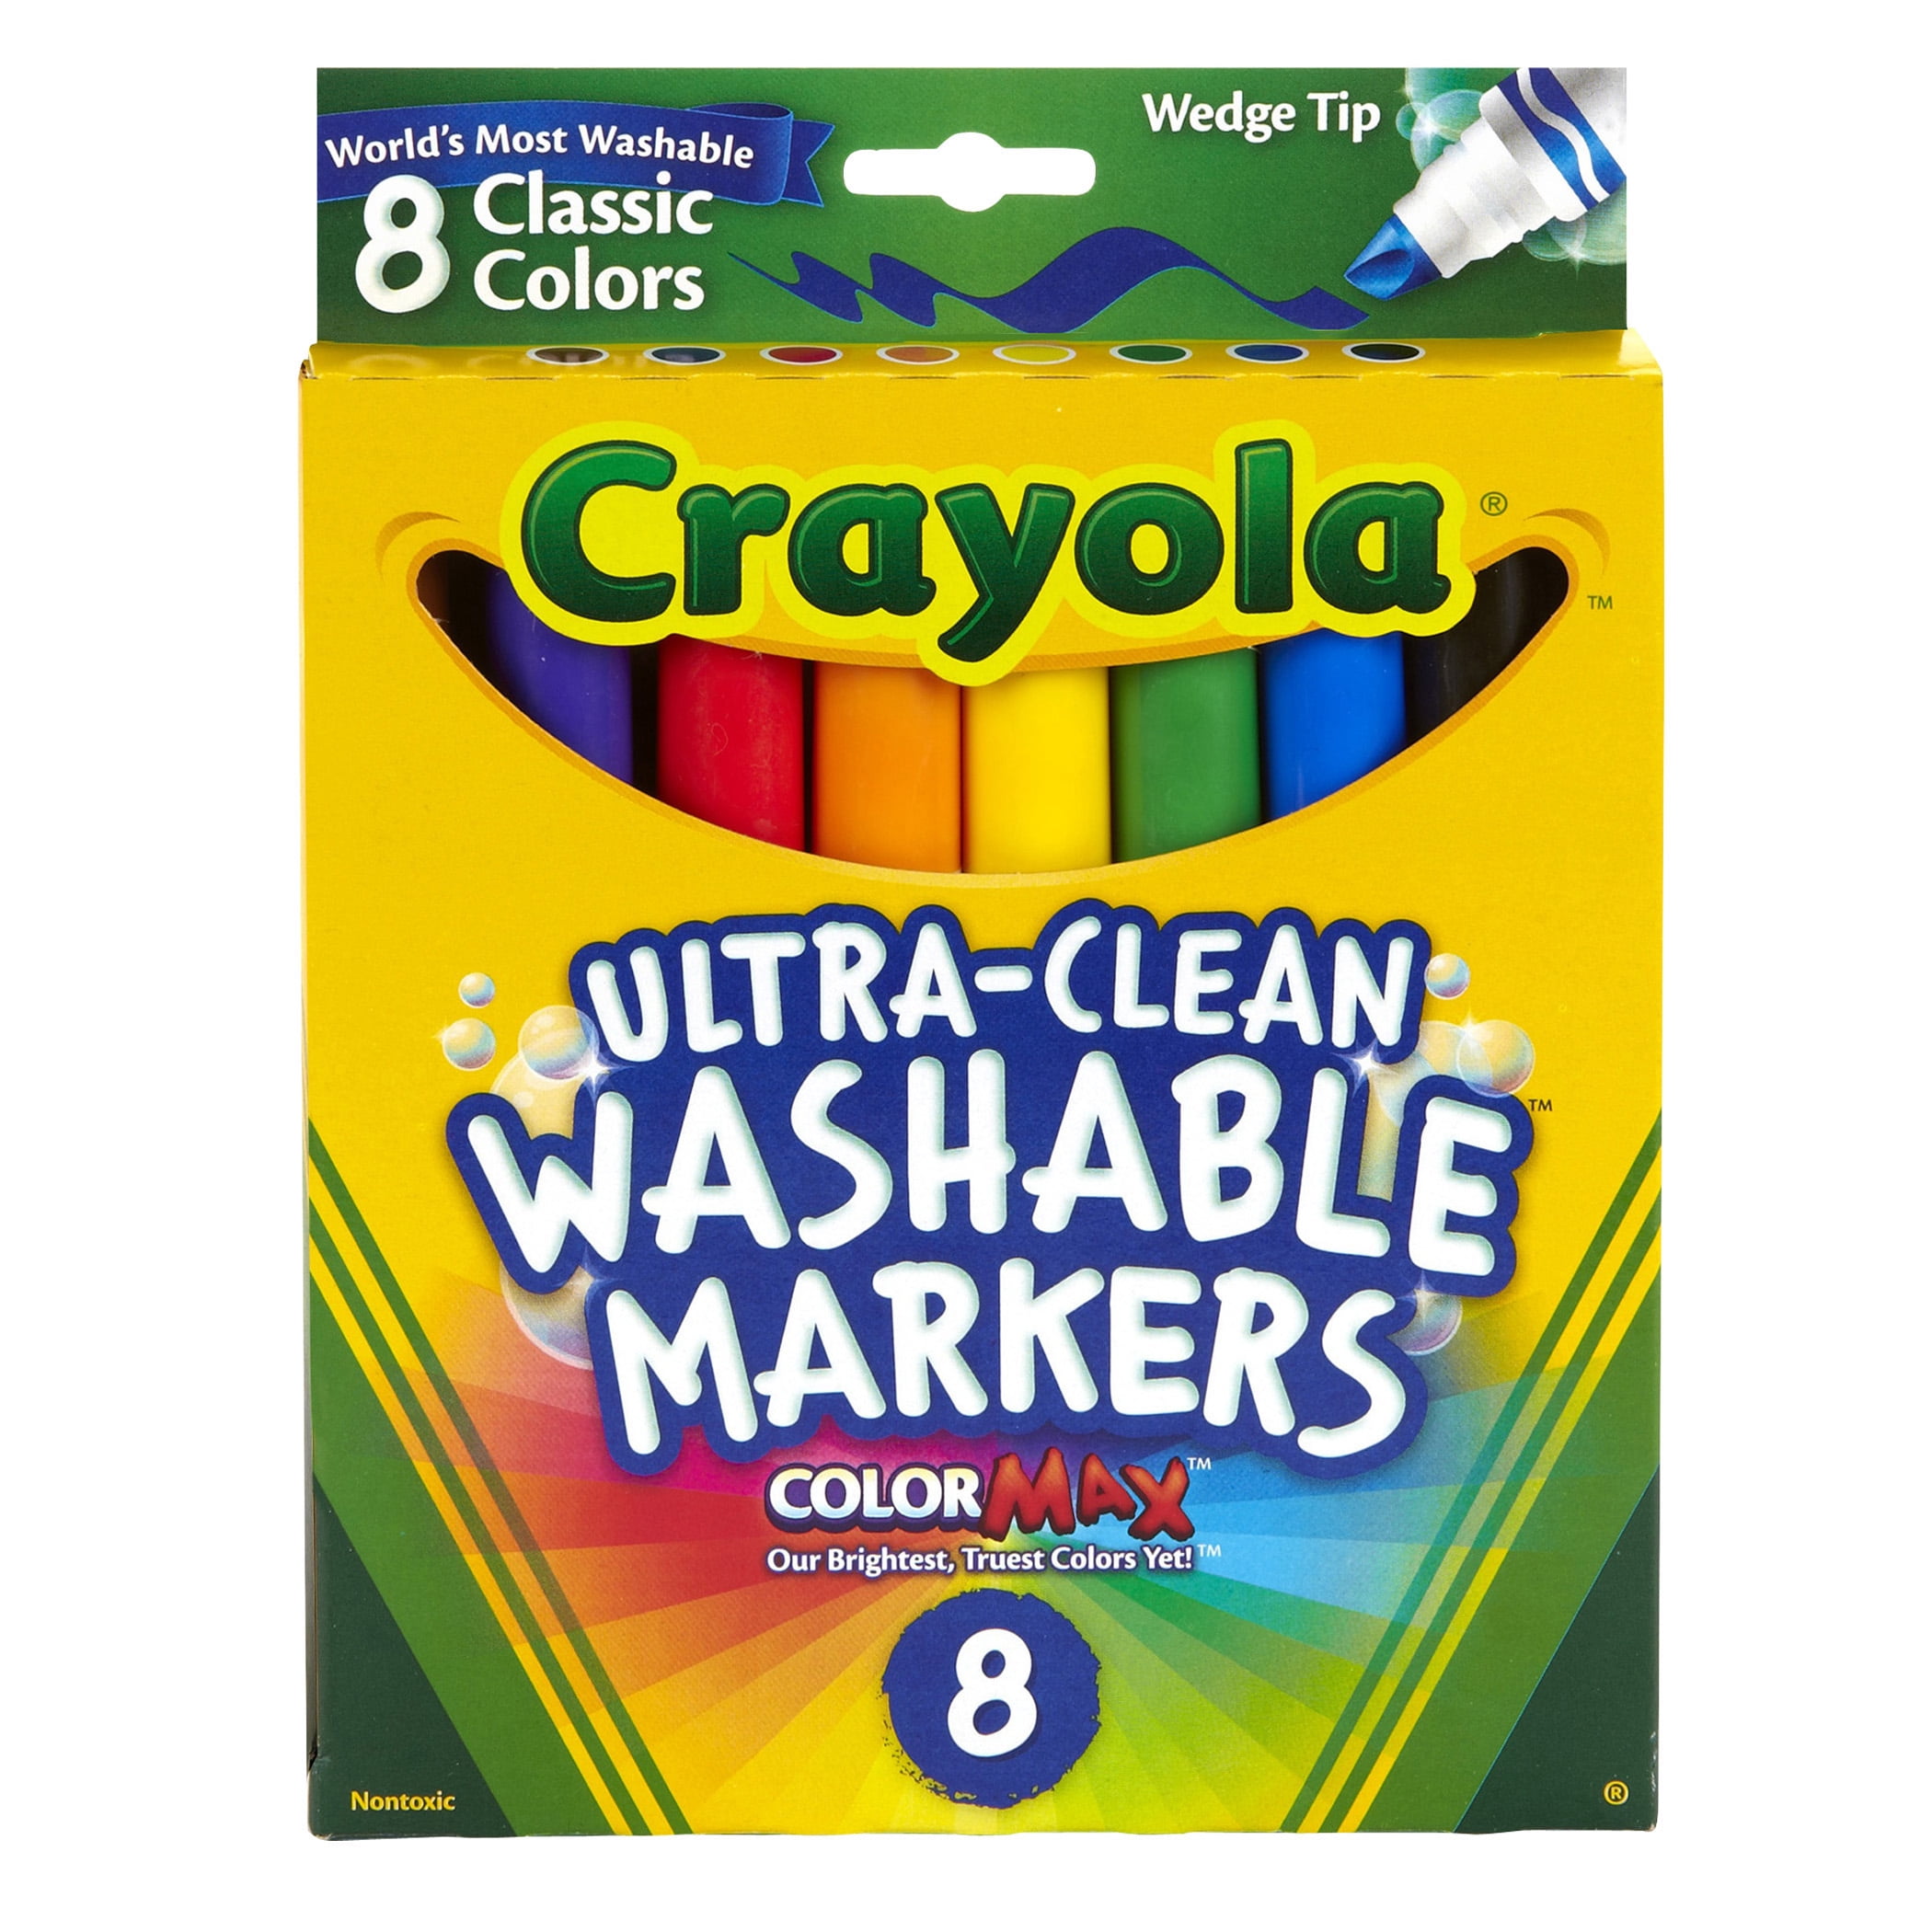 Crayola Pip Squeaks 25 Washable Markers Set with Paper, Holiday Gift for  Kids, Stocking Stuffer, Ages 4+ 